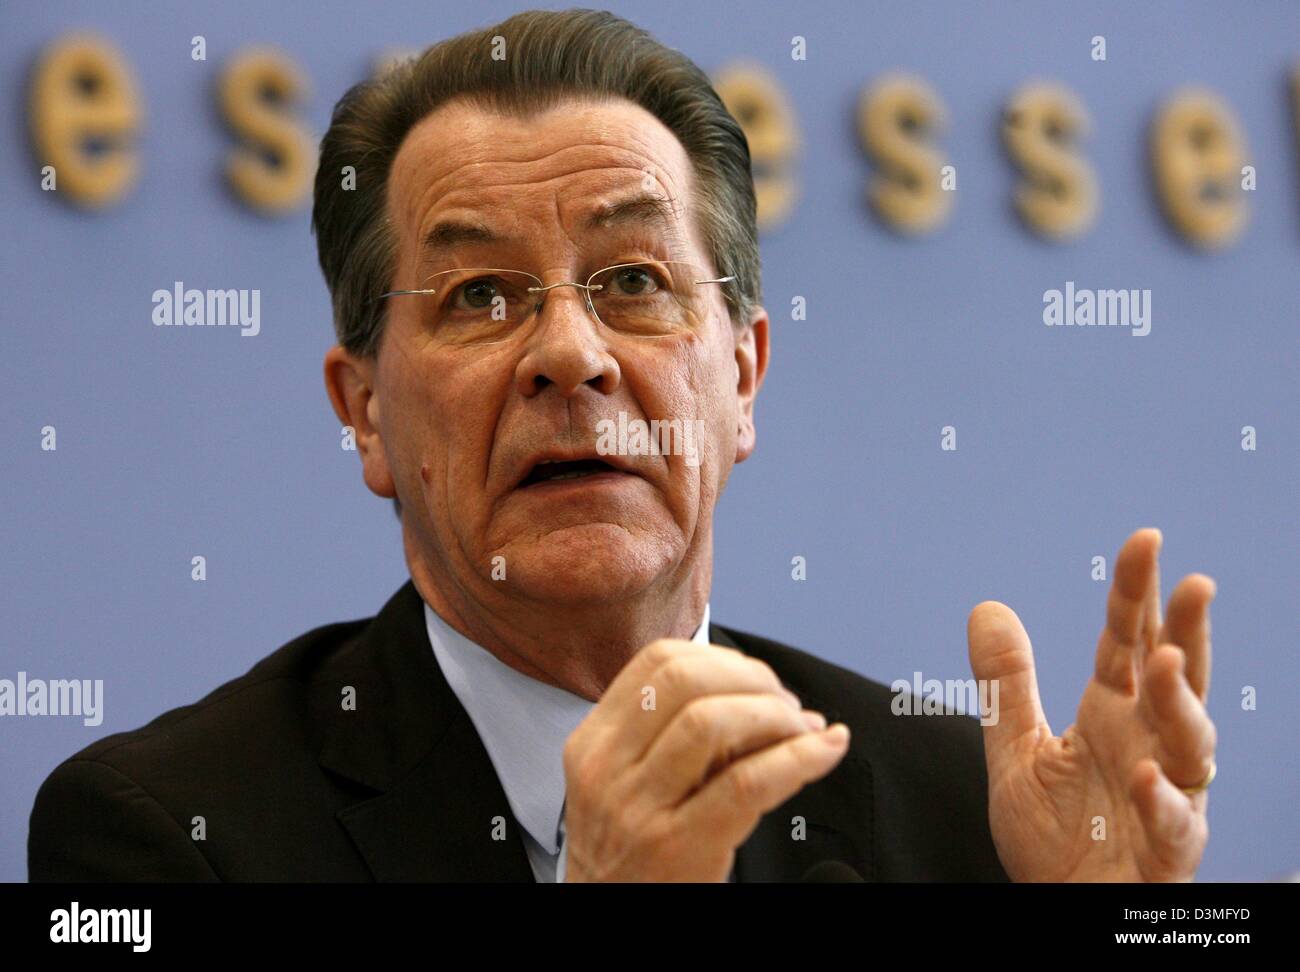 Federal Minister for Labour and Social Affairs Franz Muentefering gestures during a press conference in Berlin, Germany, Wednesday, 08 March 2006. Muentefering informed journalists about the government's 'Initiative 50+', which is designed to create jobs especially for people older than 50 years of age. Photo: Steffen Kugler Stock Photo